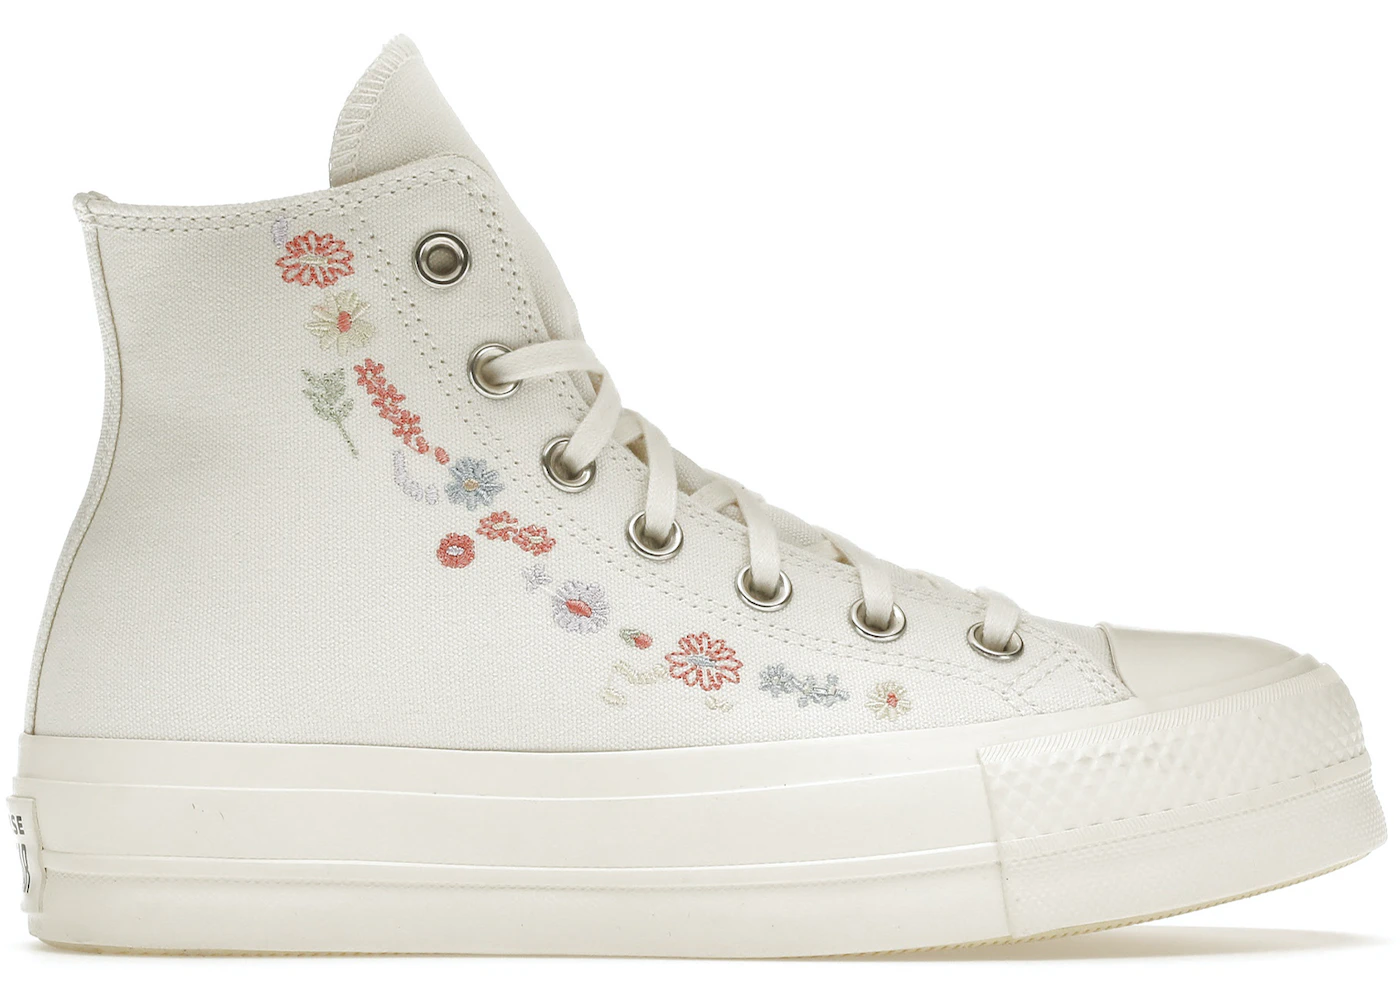 Converse Chuck Taylor All-Star Lift Hi Things To Grow Egret - A01586C - US